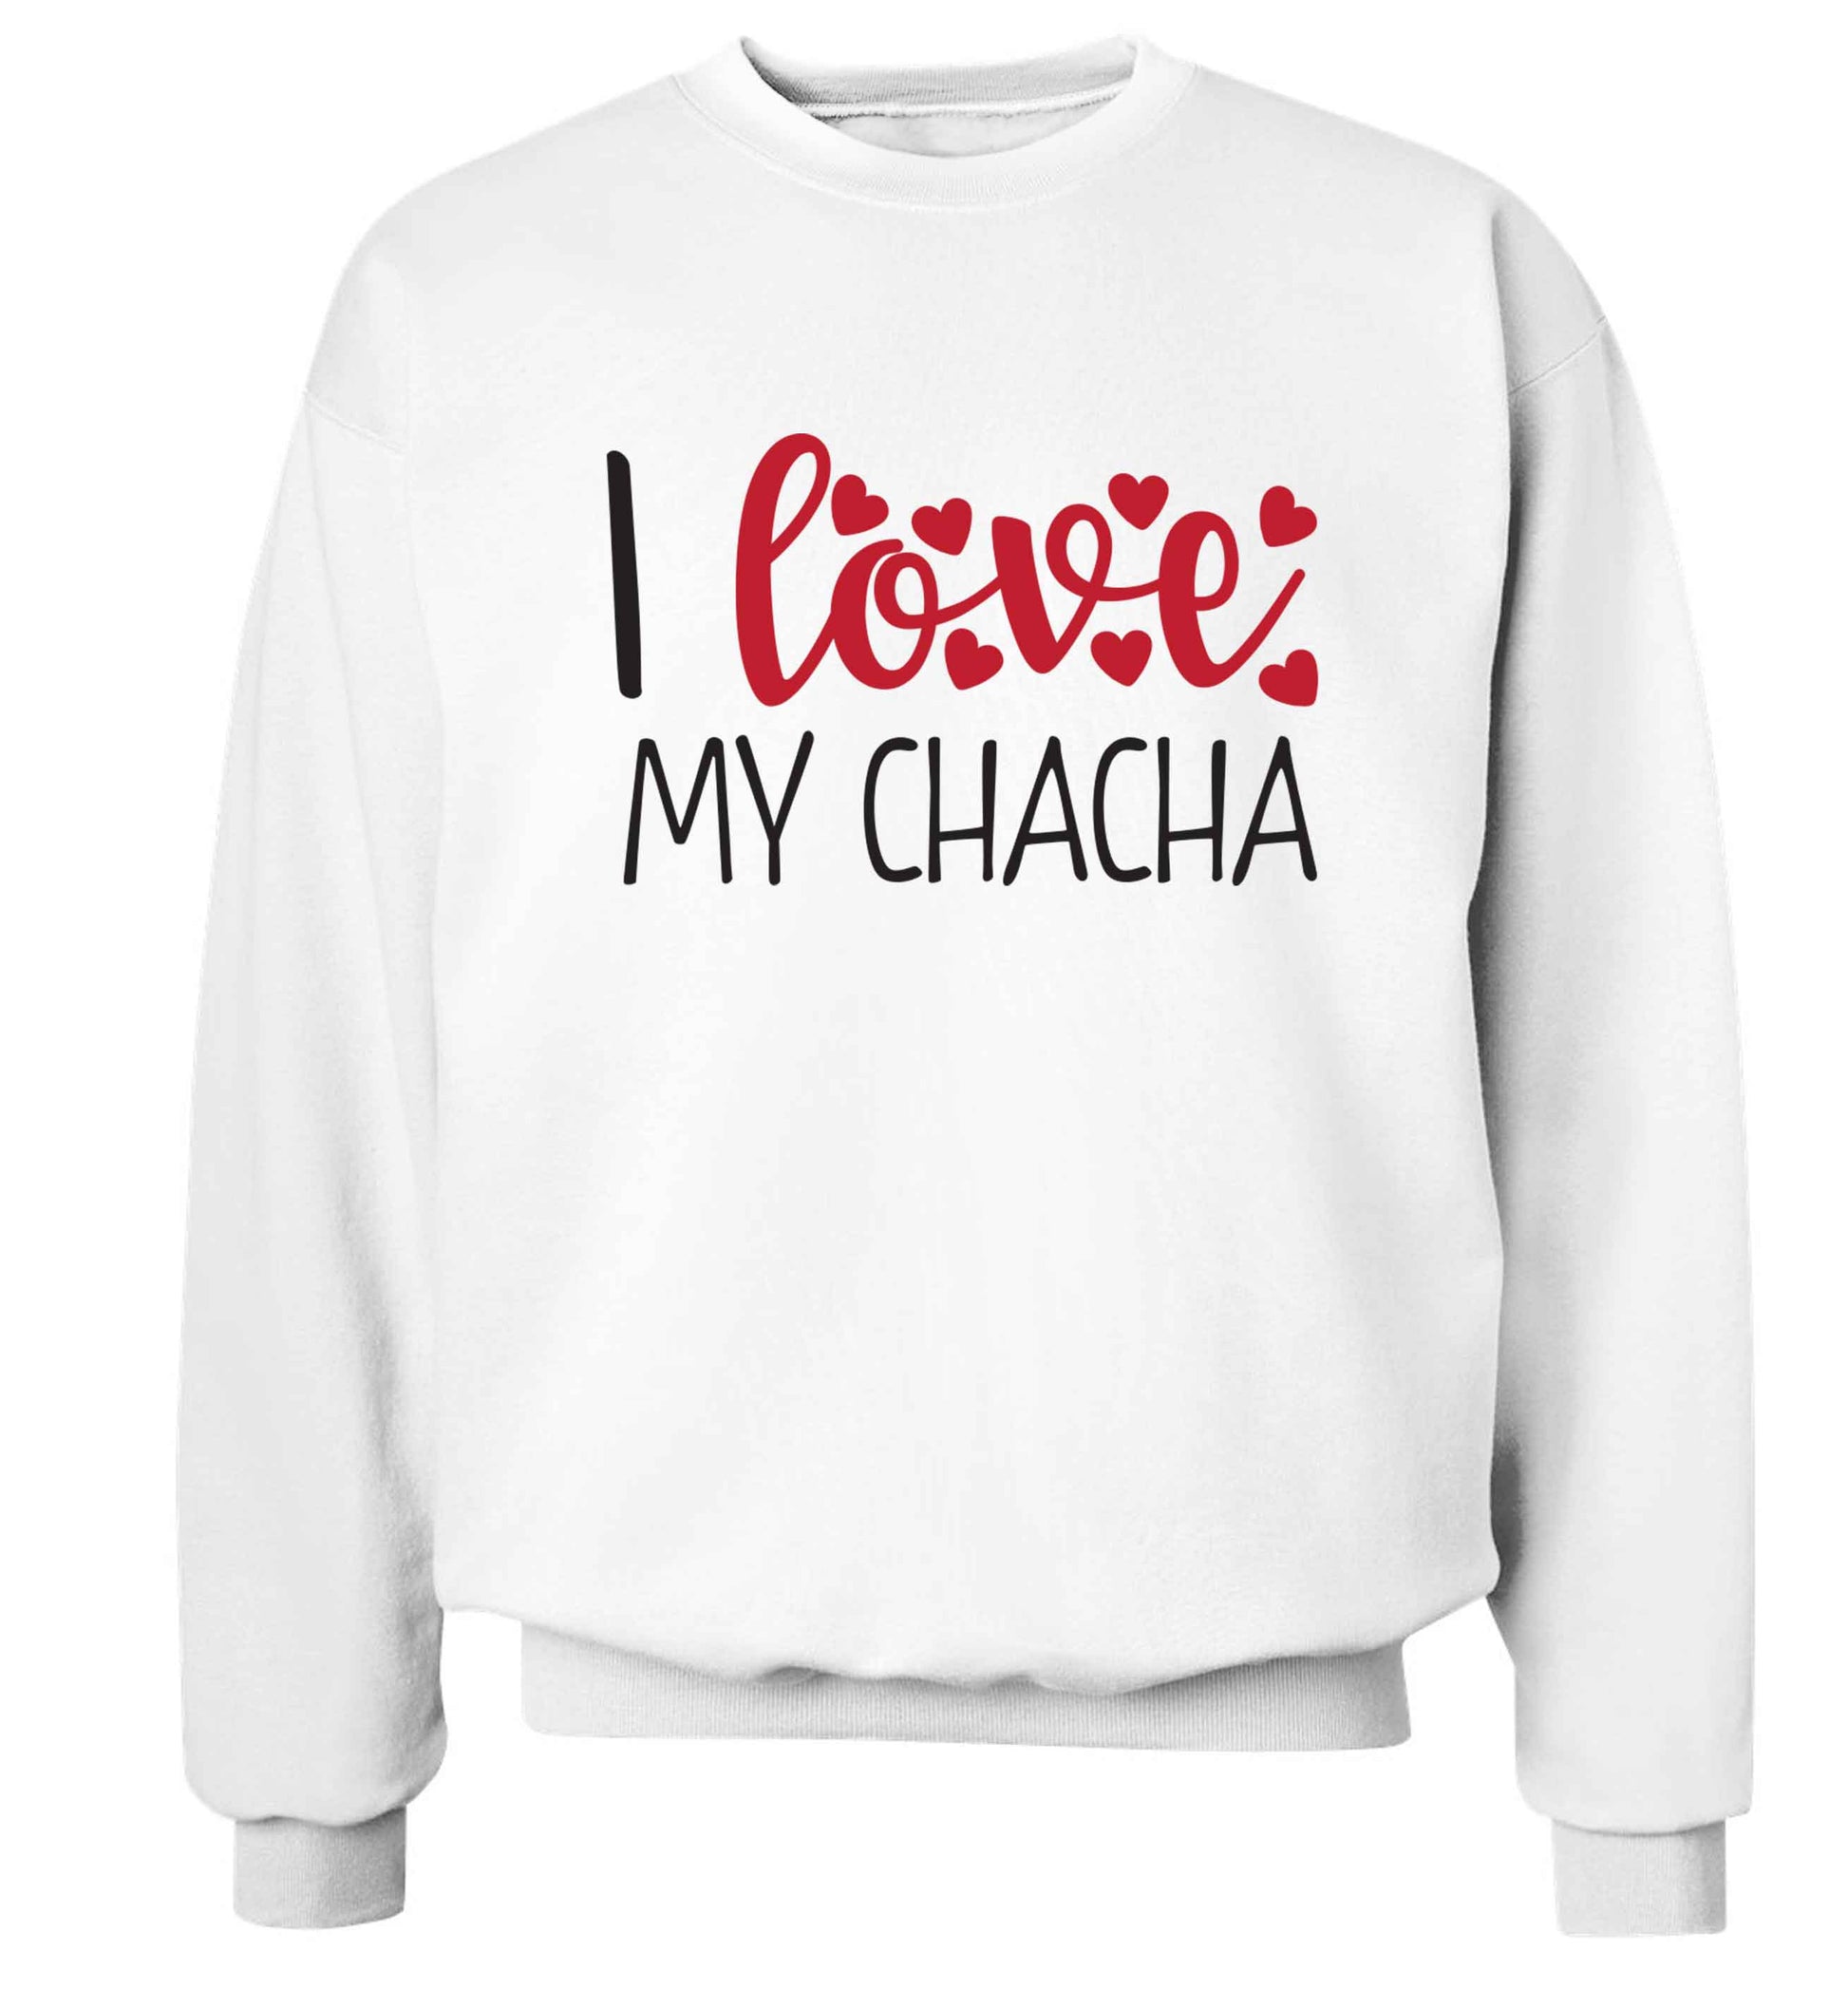 I love my chacha Adult's unisex white Sweater 2XL